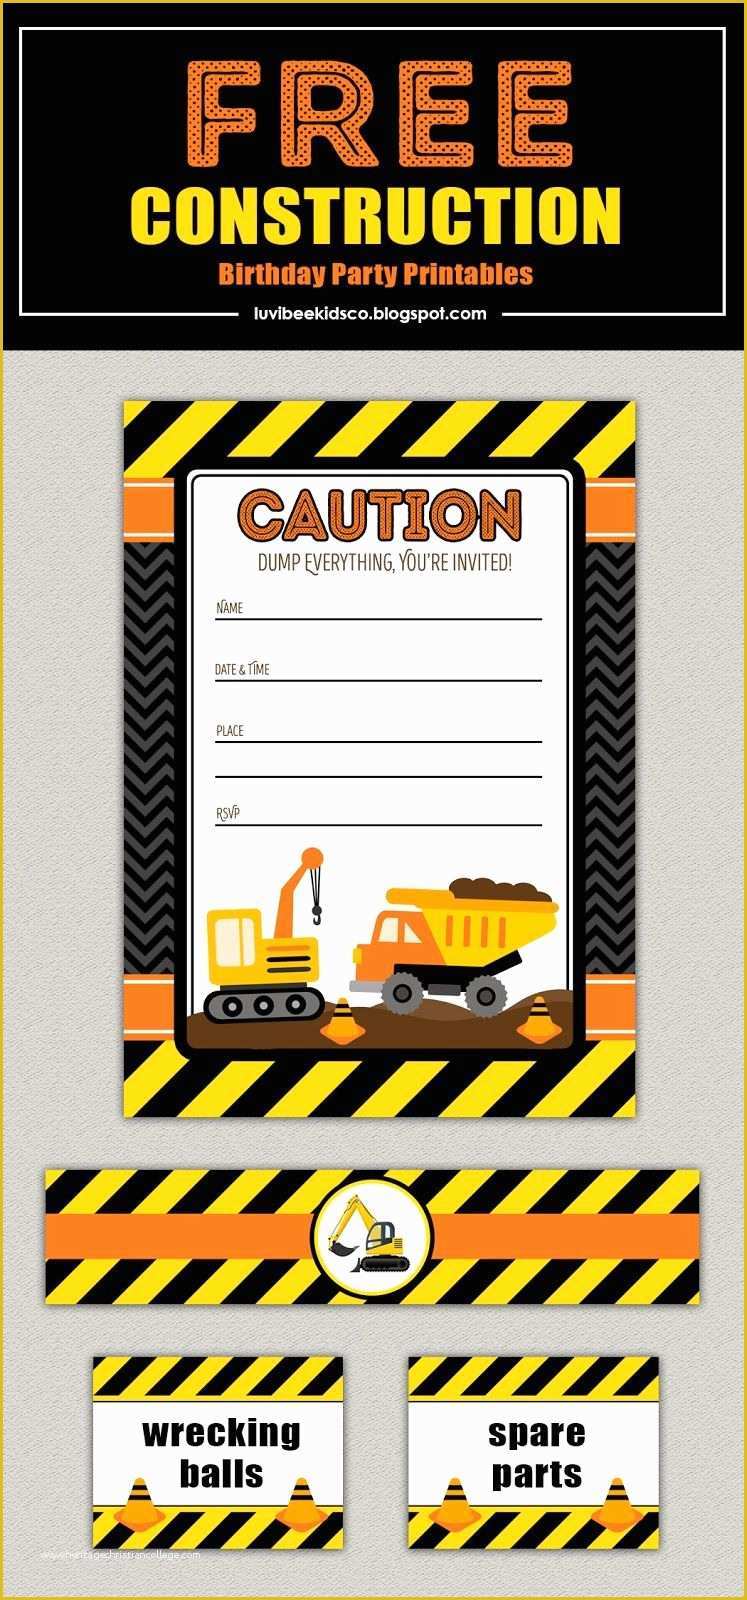 Free Construction Party Templates Of This Blog is Full Of Digital Design Fun for the Family It